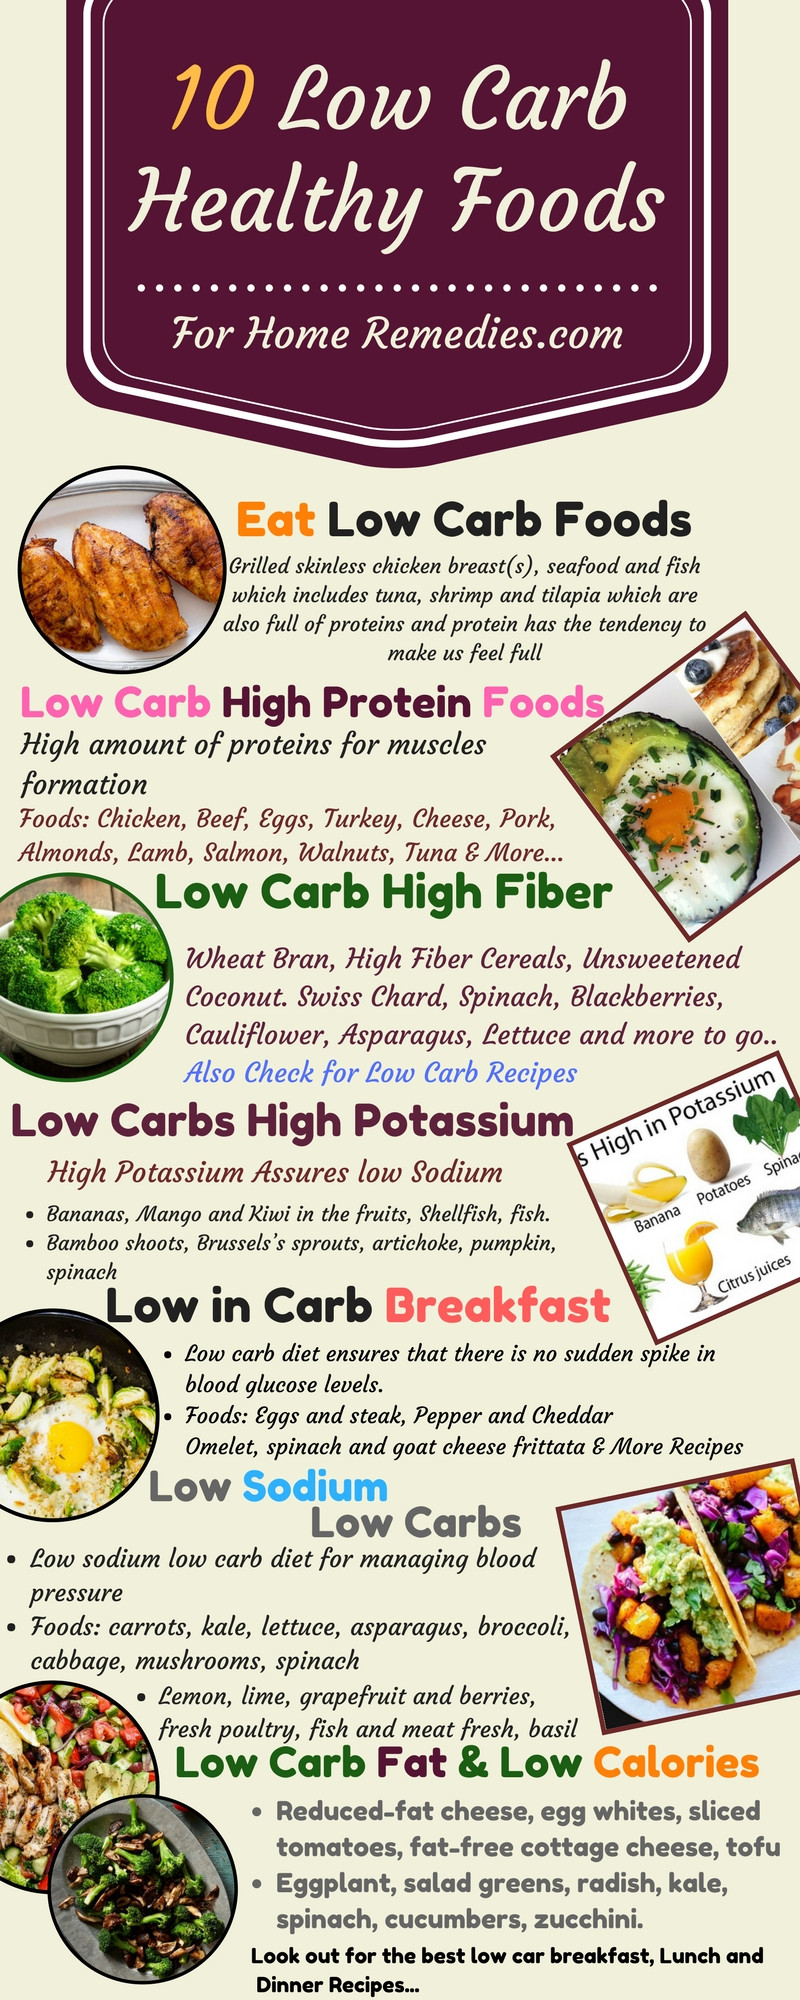 Healthy Low Carb Diet
 10 Low Carb Foods Low Fat Sugar High Protein Fiber